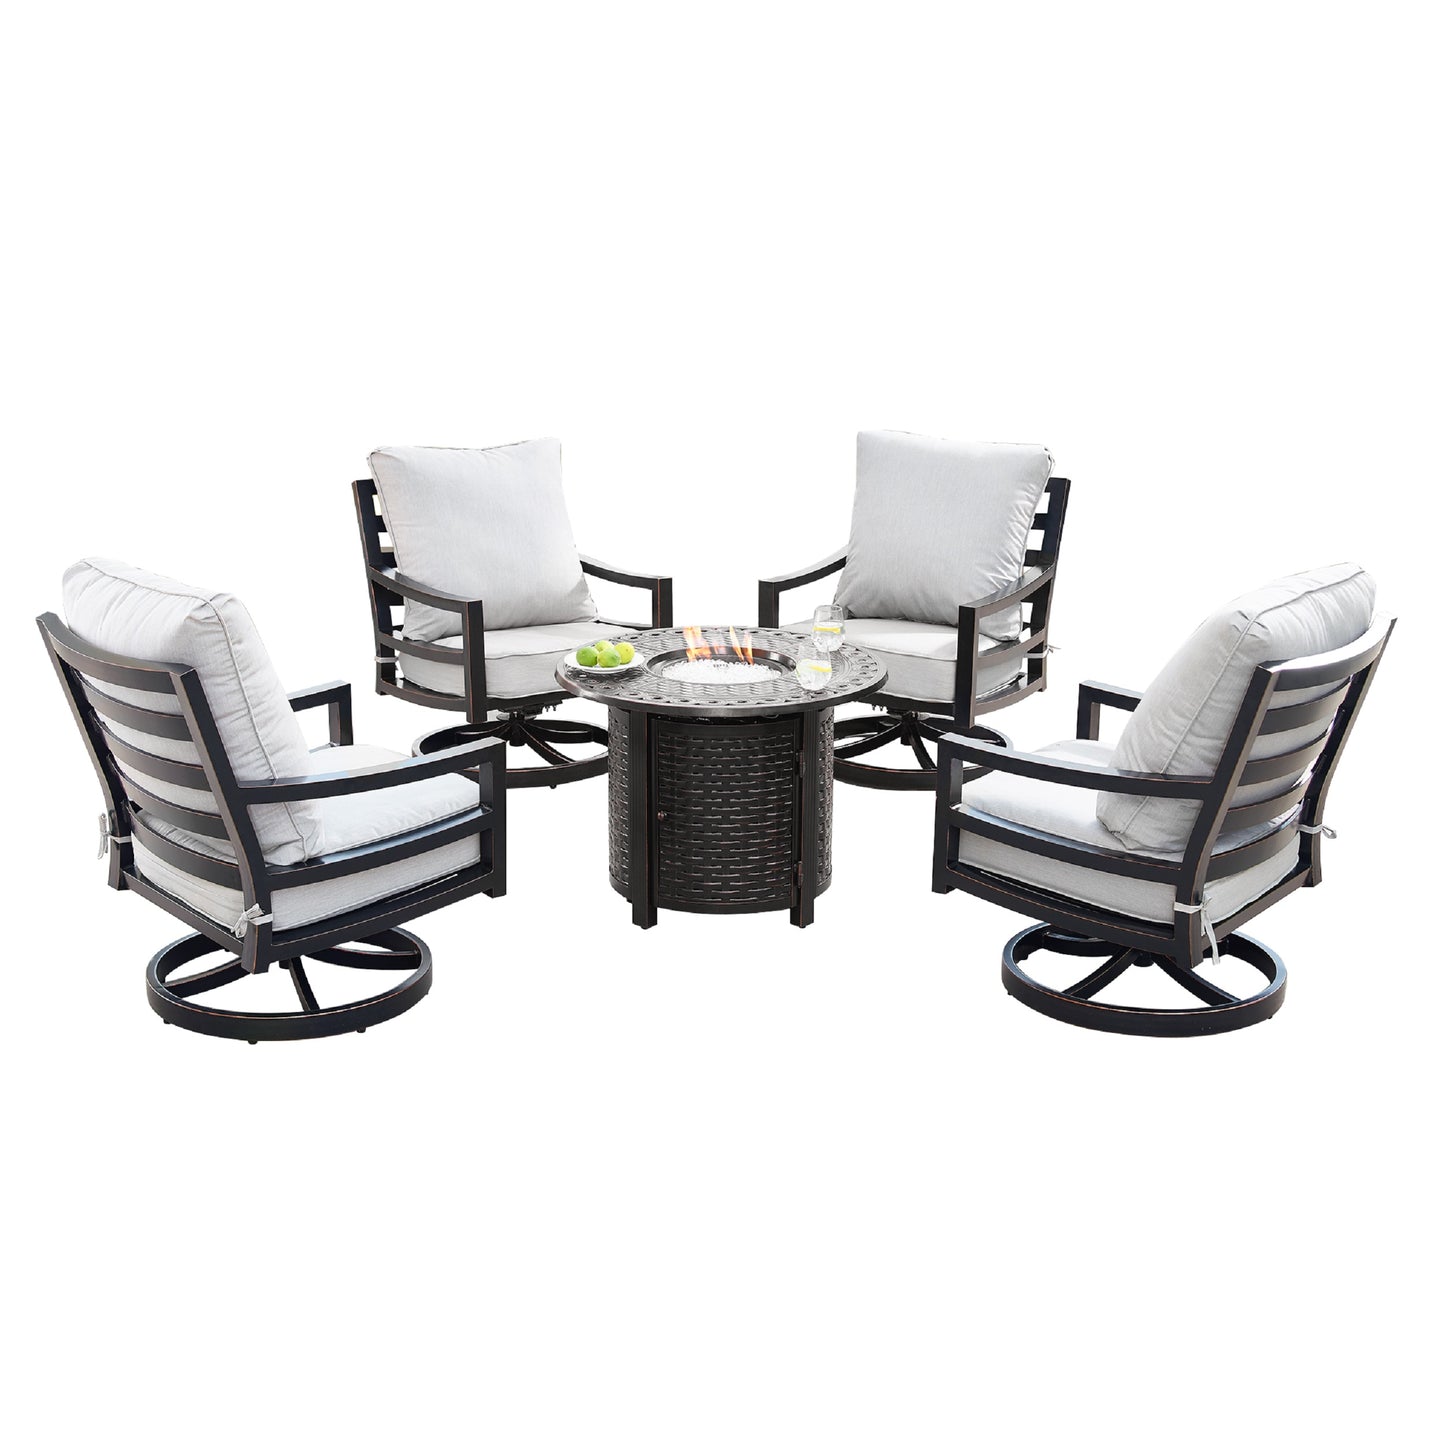 Aluminum 34-in Round Patio Fire Table Set with Swivel Rocking Chairs